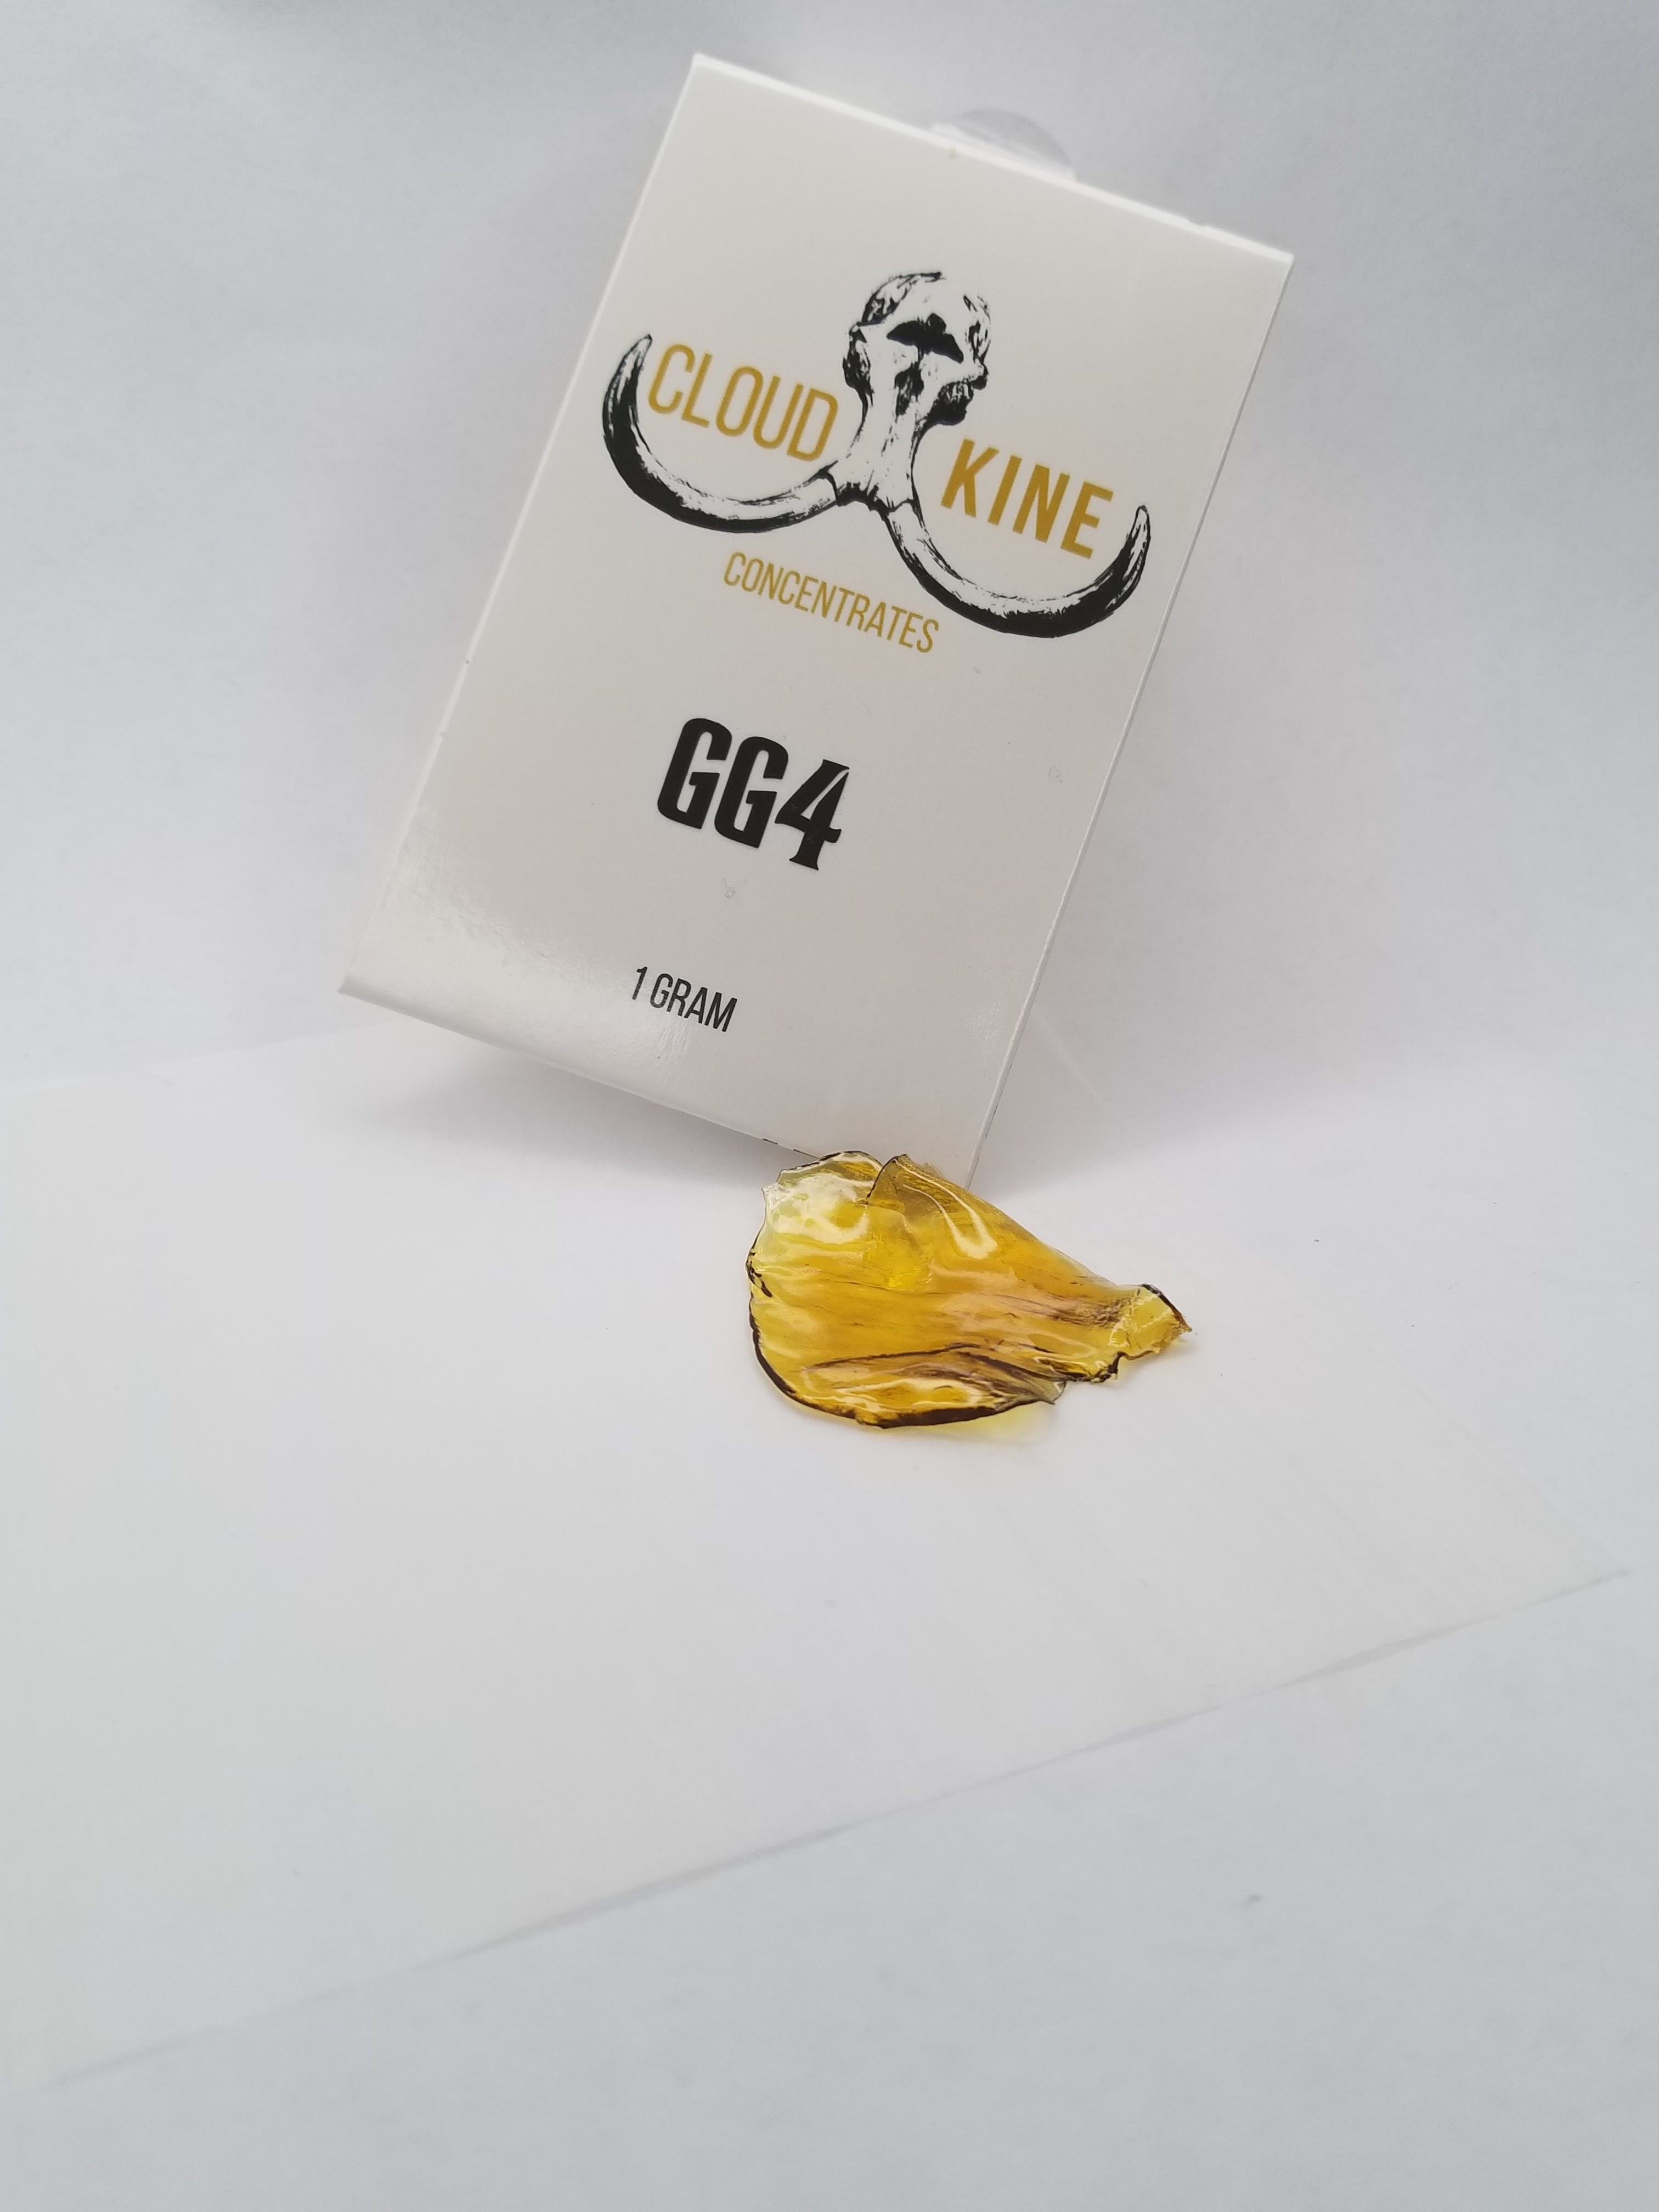 concentrate-cloud-kine-gg-234